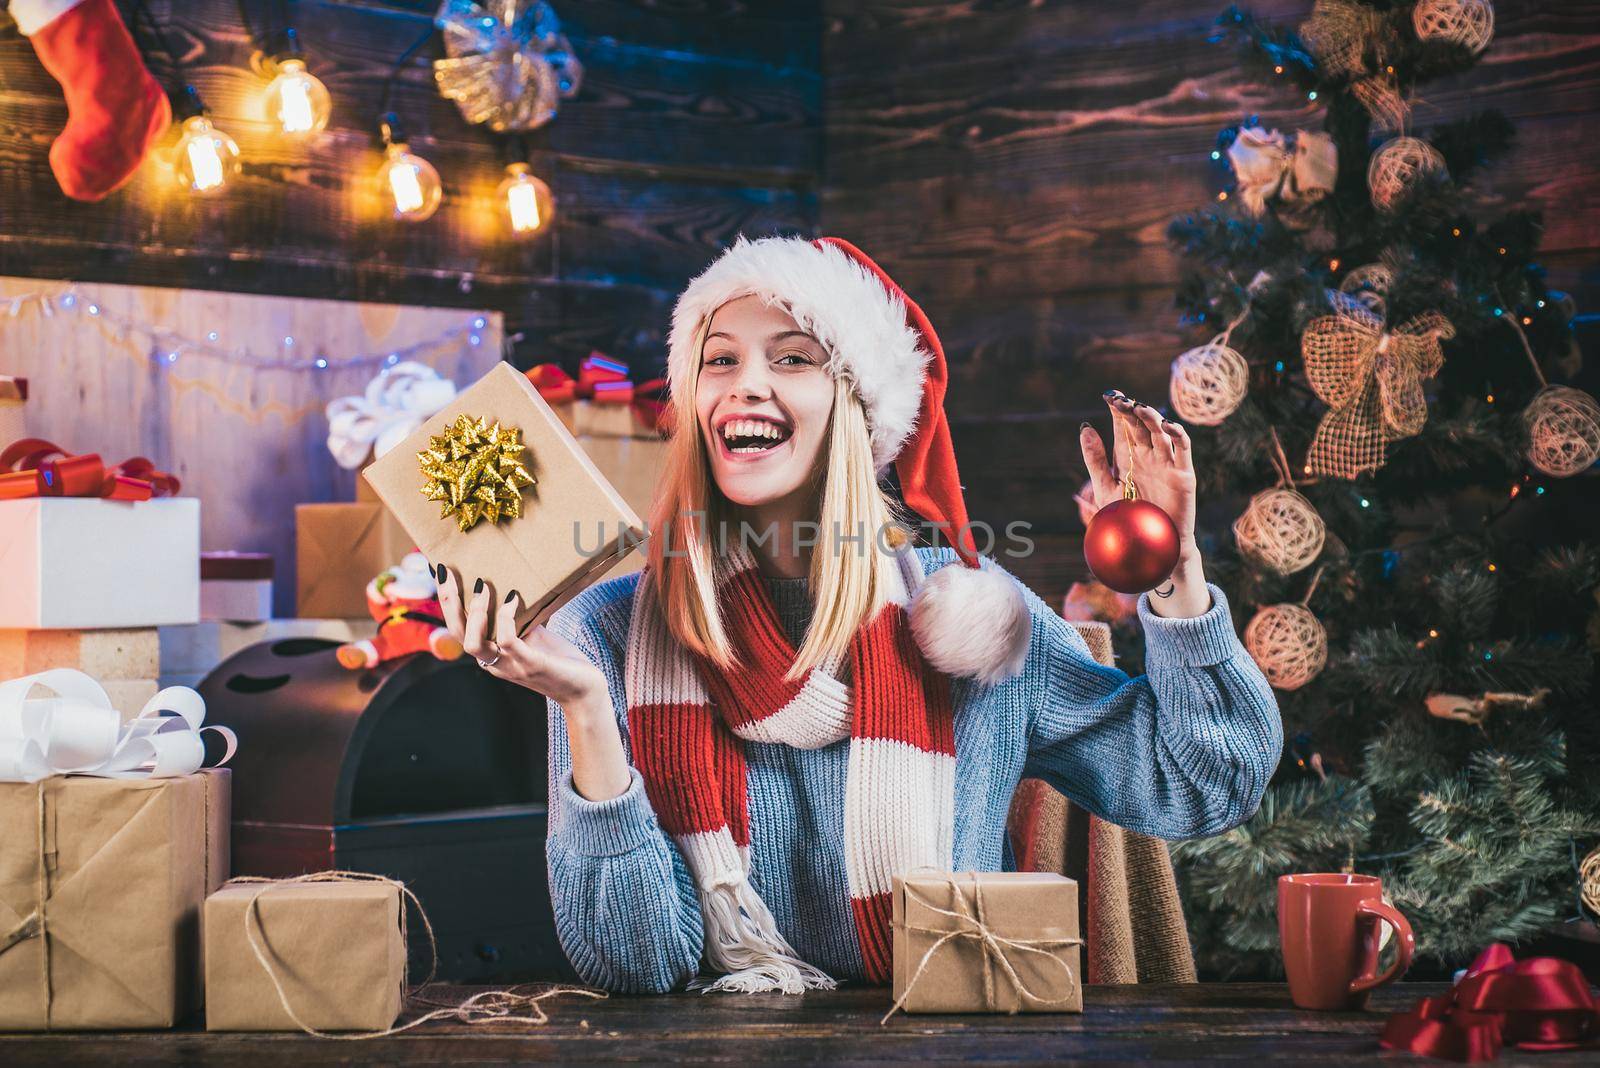 Positive human emotions facial expressions. Portrait of funny excited girl with gift indoors on Christmas tree. Expressions face